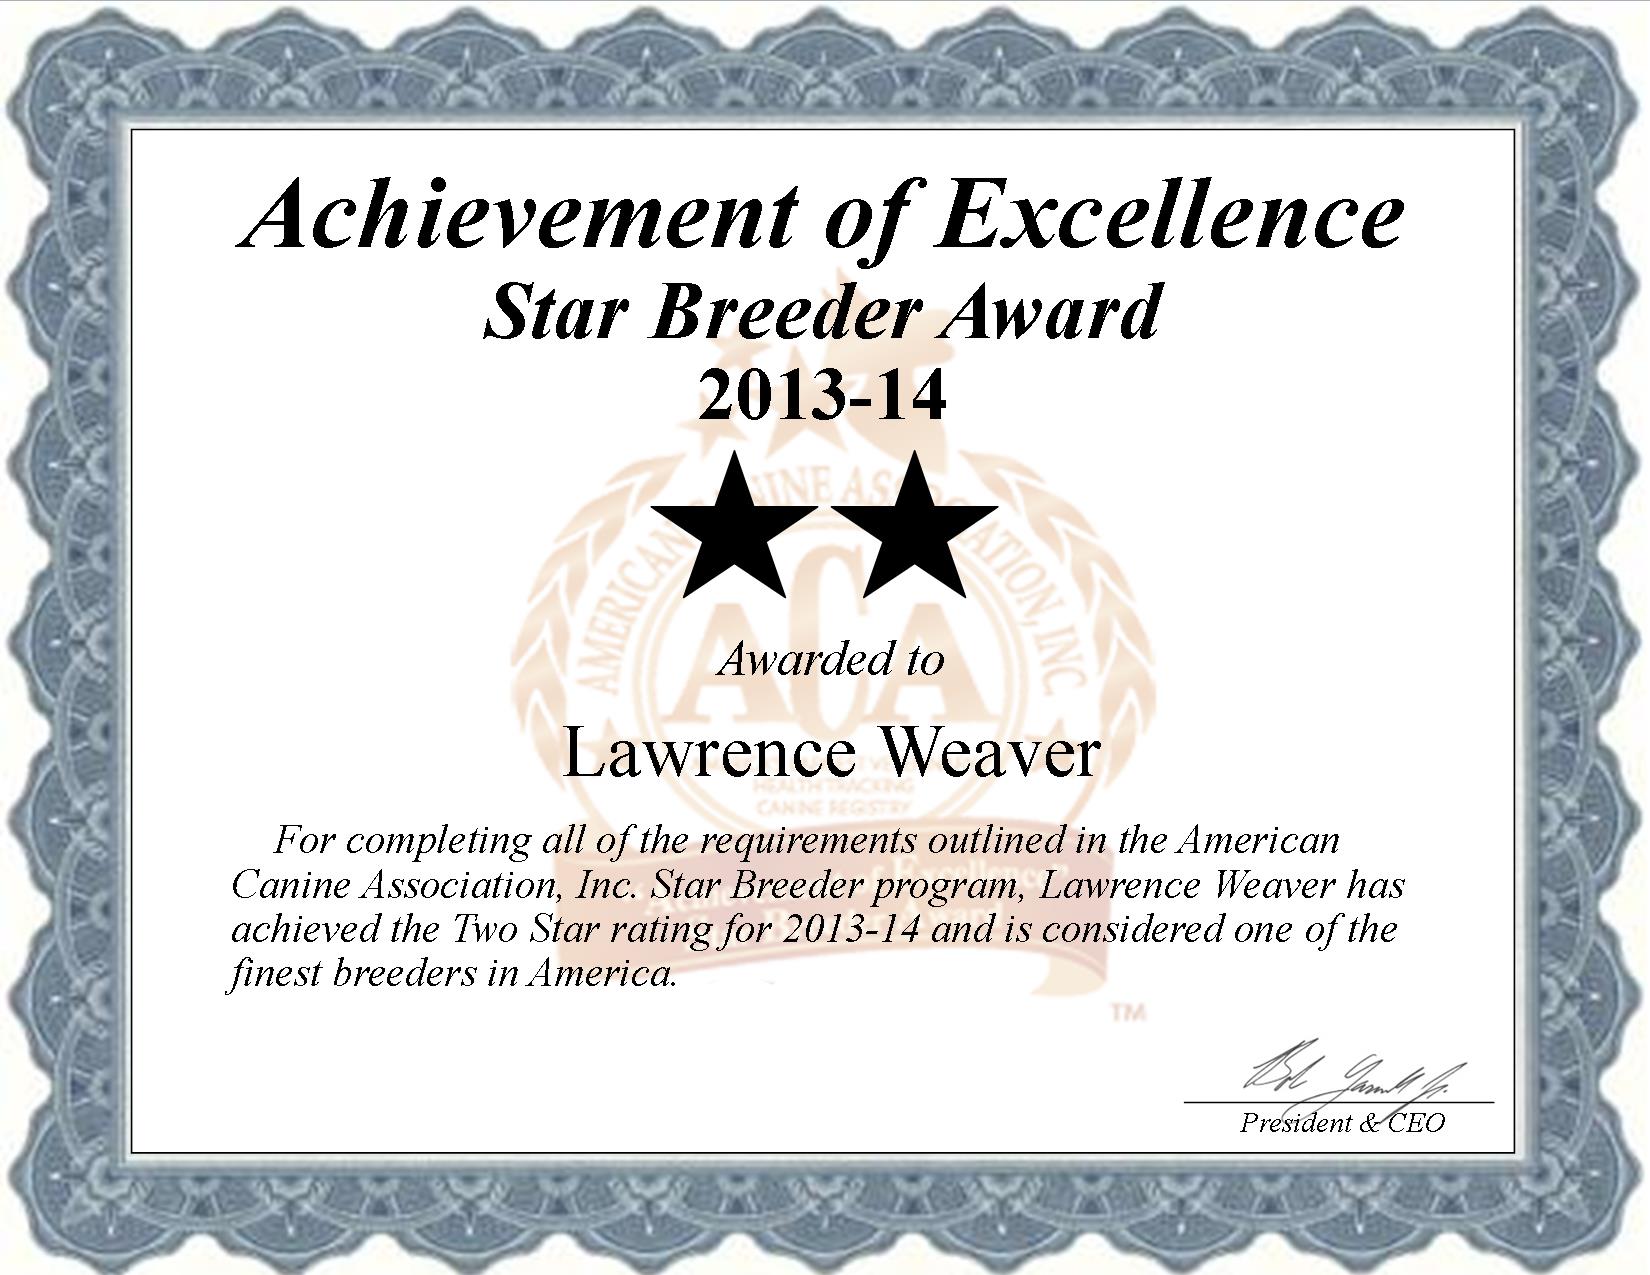 Lawrence, Weaver, dog, breeder, star, certificate, Lawrence-Weaver, Dundee, NY, New York, puppy, dog, kennels, mill, puppymill, usda, 5-star, aca, ica, registered, Shiba Inu